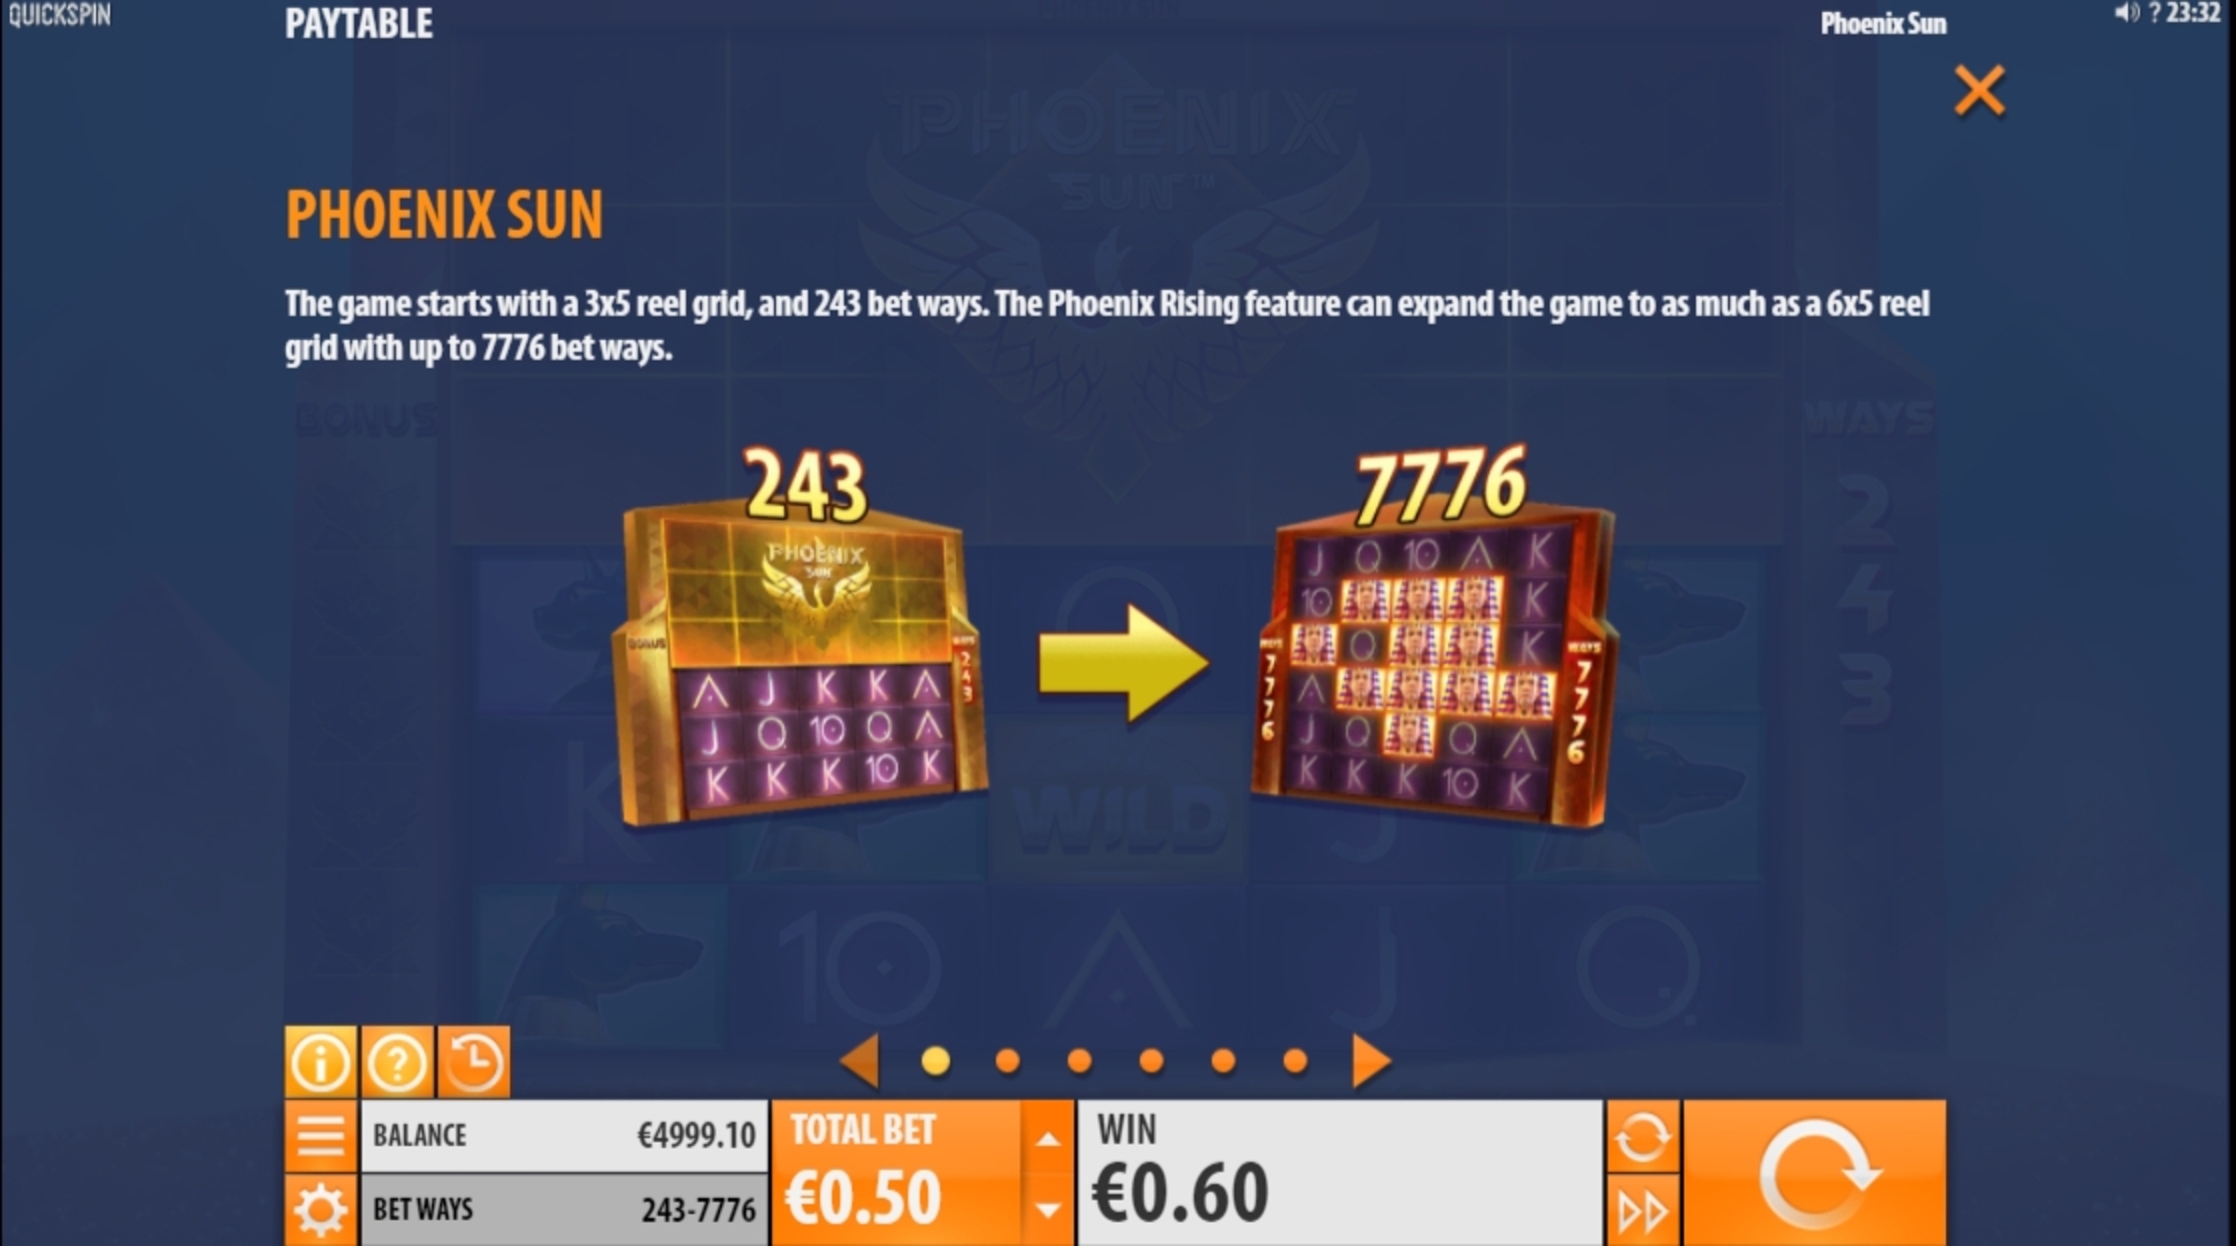 Info of Phoenix Sun Slot Game by Quickspin